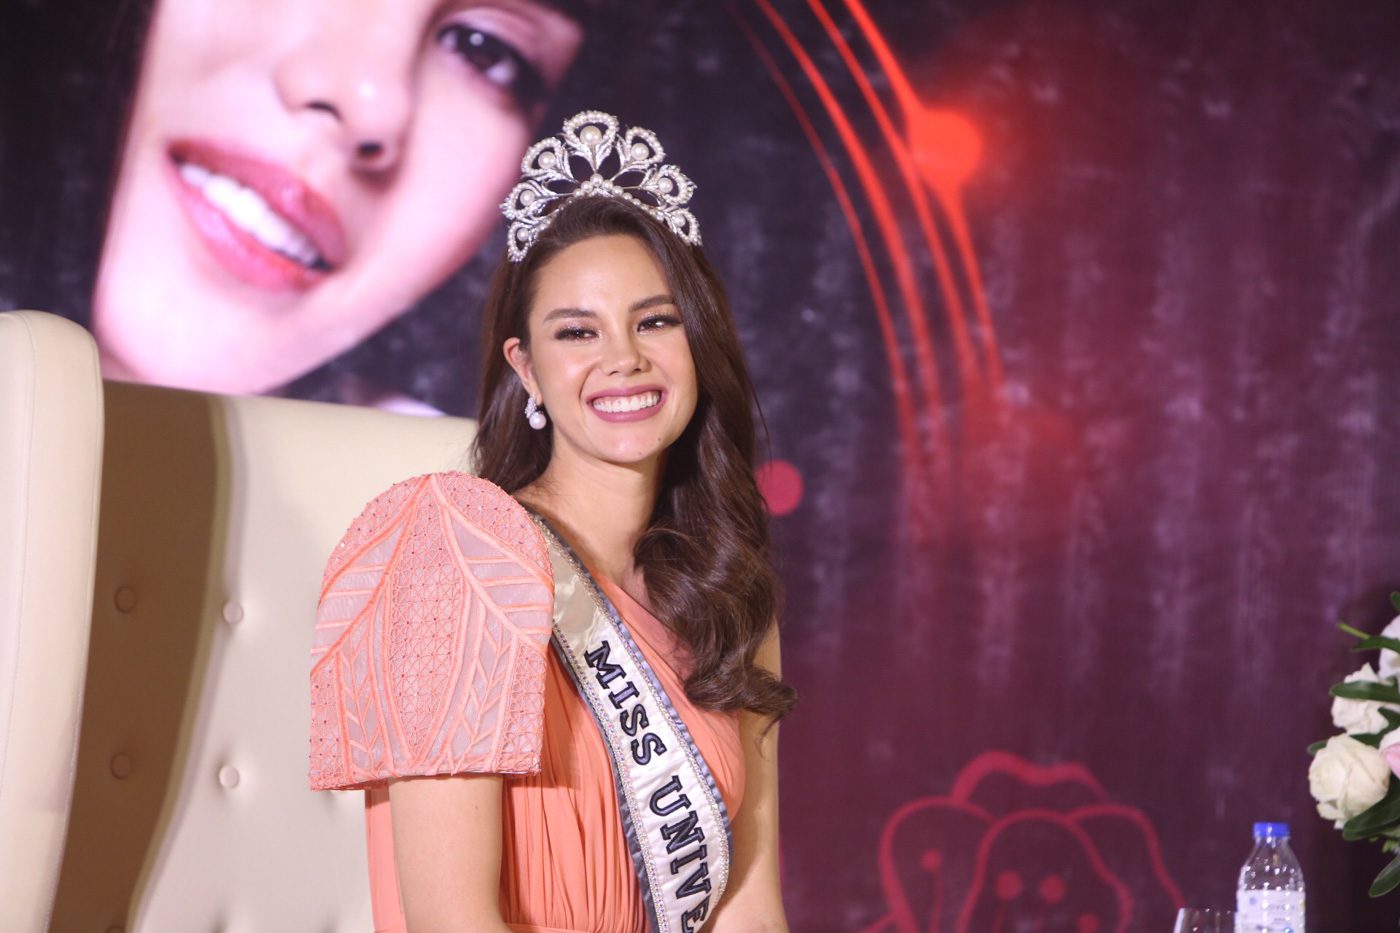 Catriona Gray reminds voters: Educate yourselves